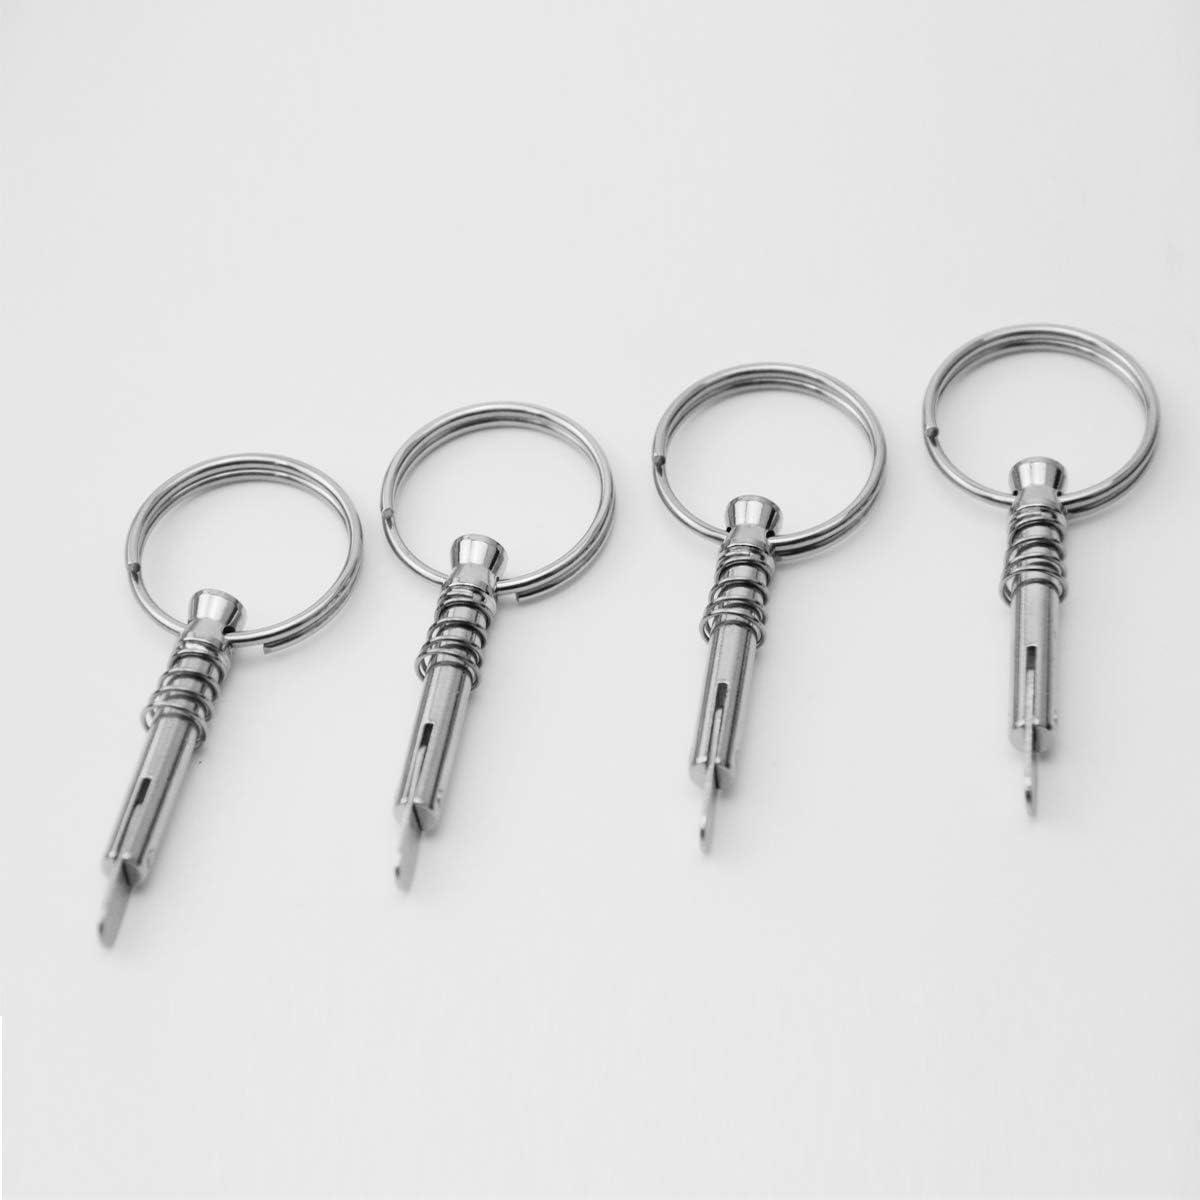 Quick Release Pin Stainless Steel Pins Marine Safety Pin Spring